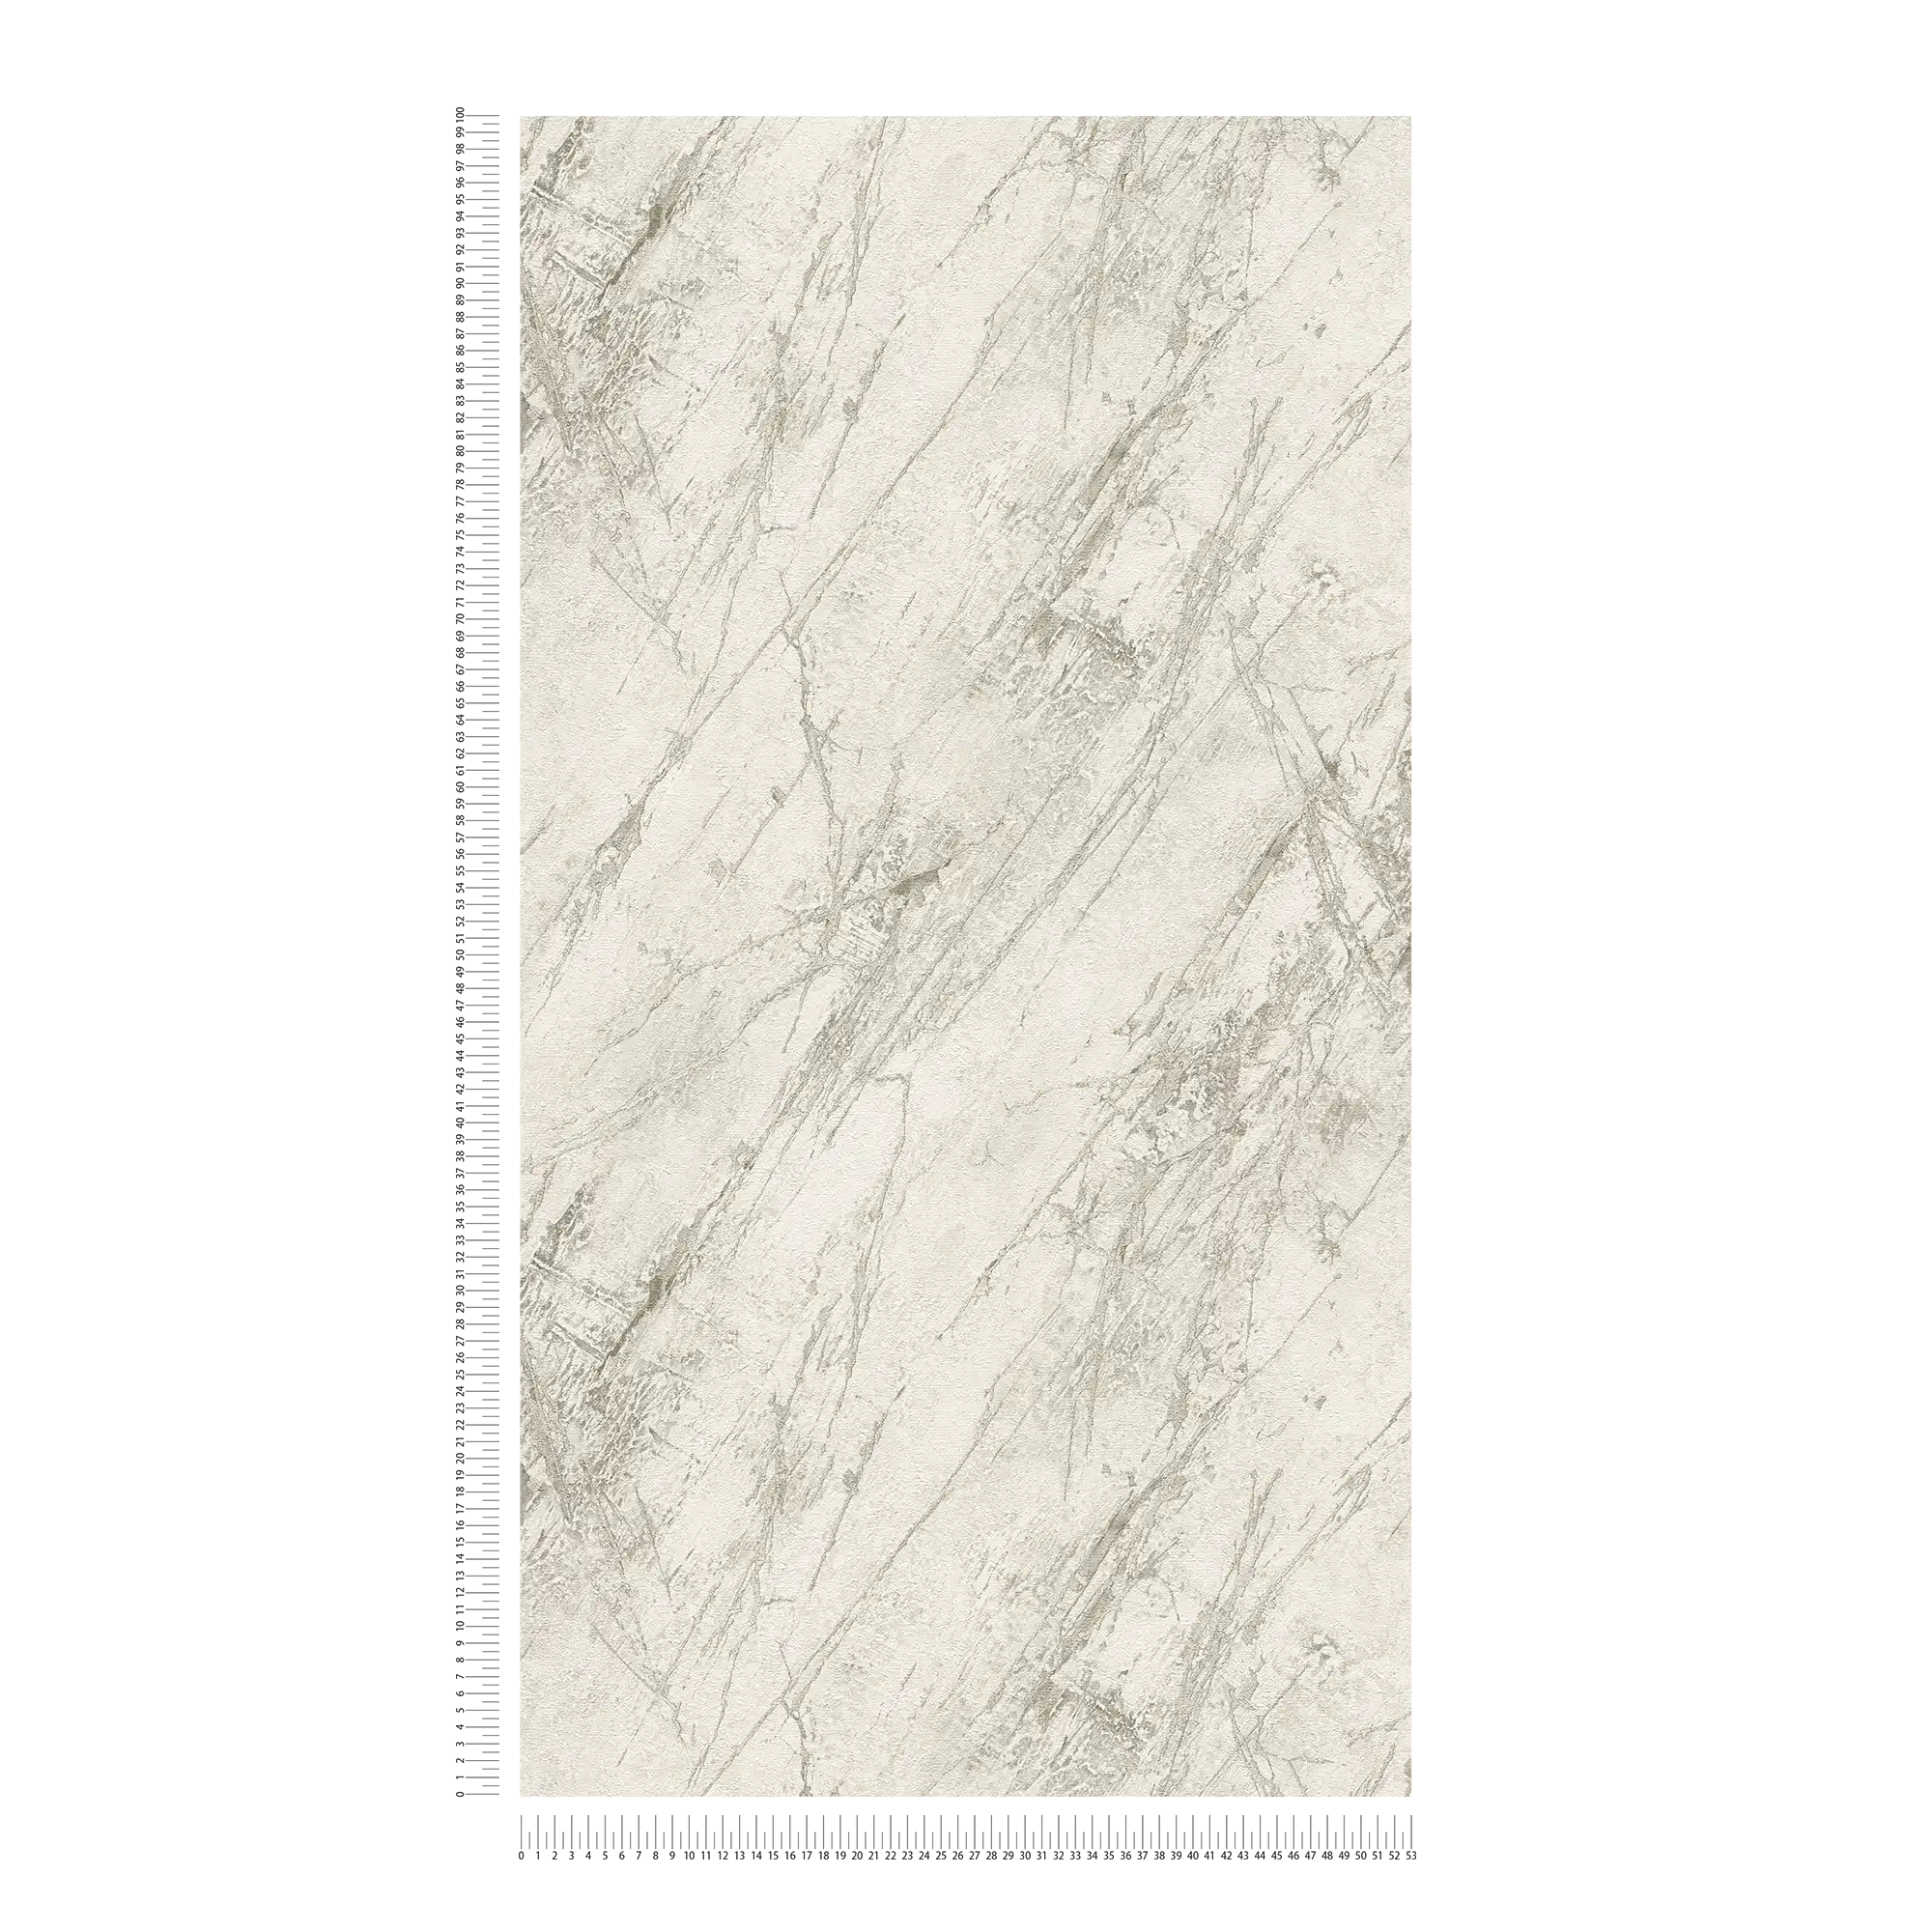             Marble wallpaper with metallic sheen and texture design
        